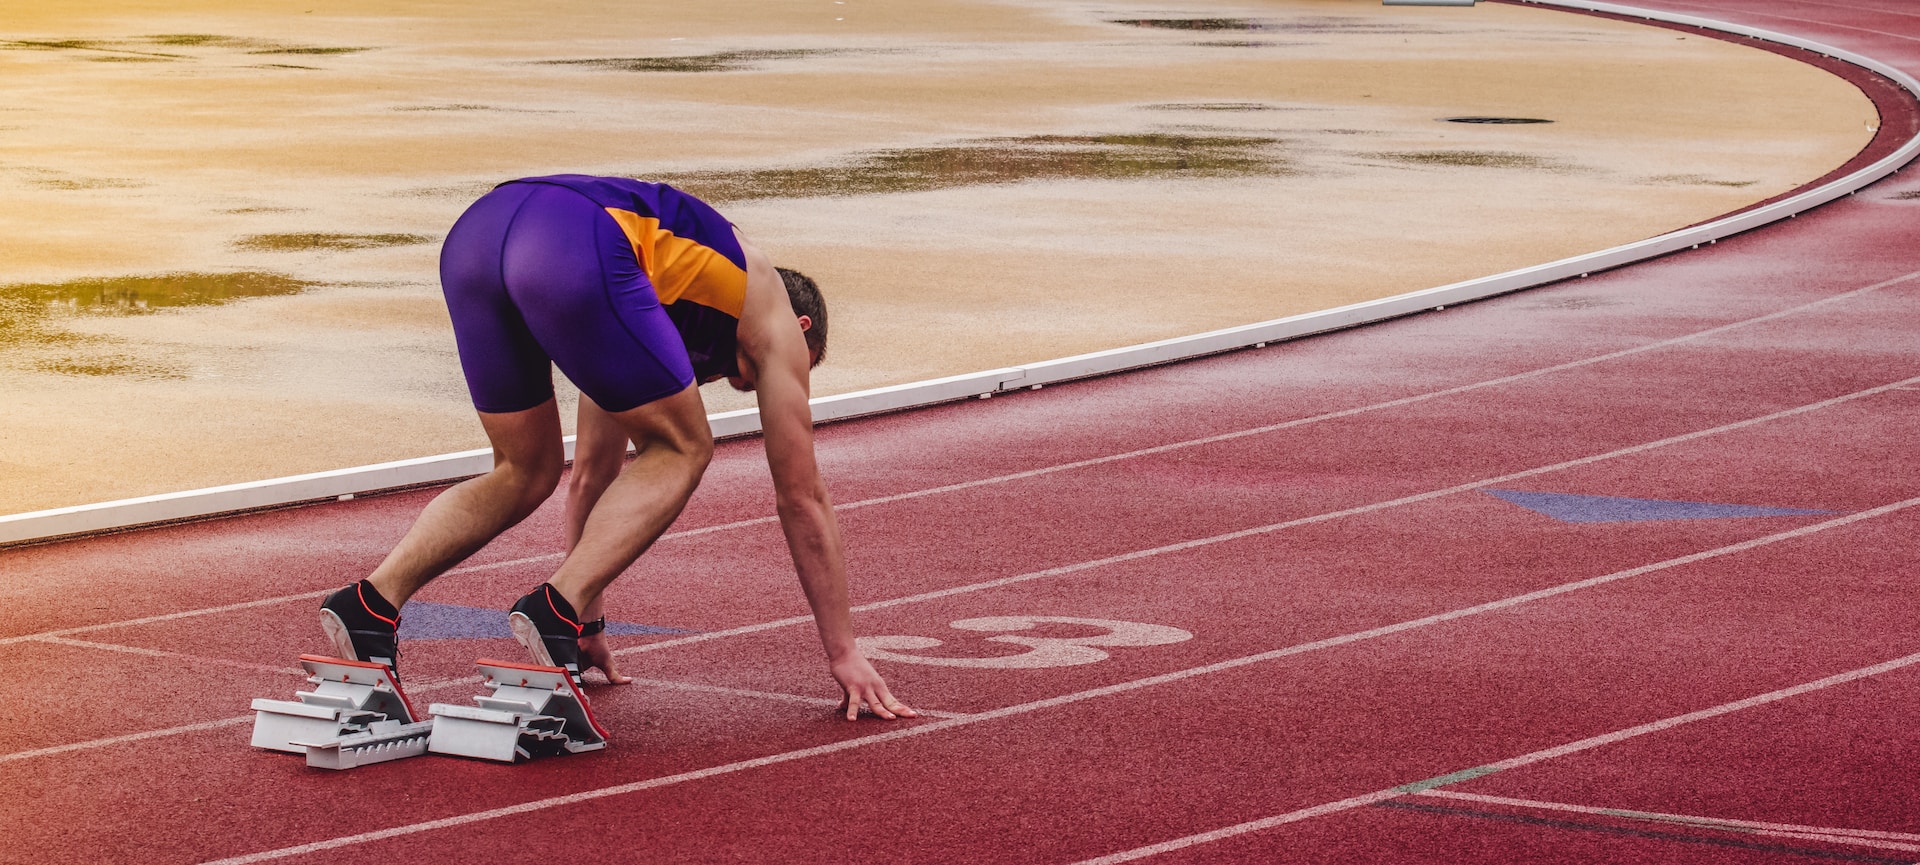 the image shows an athlete at a low start before a race